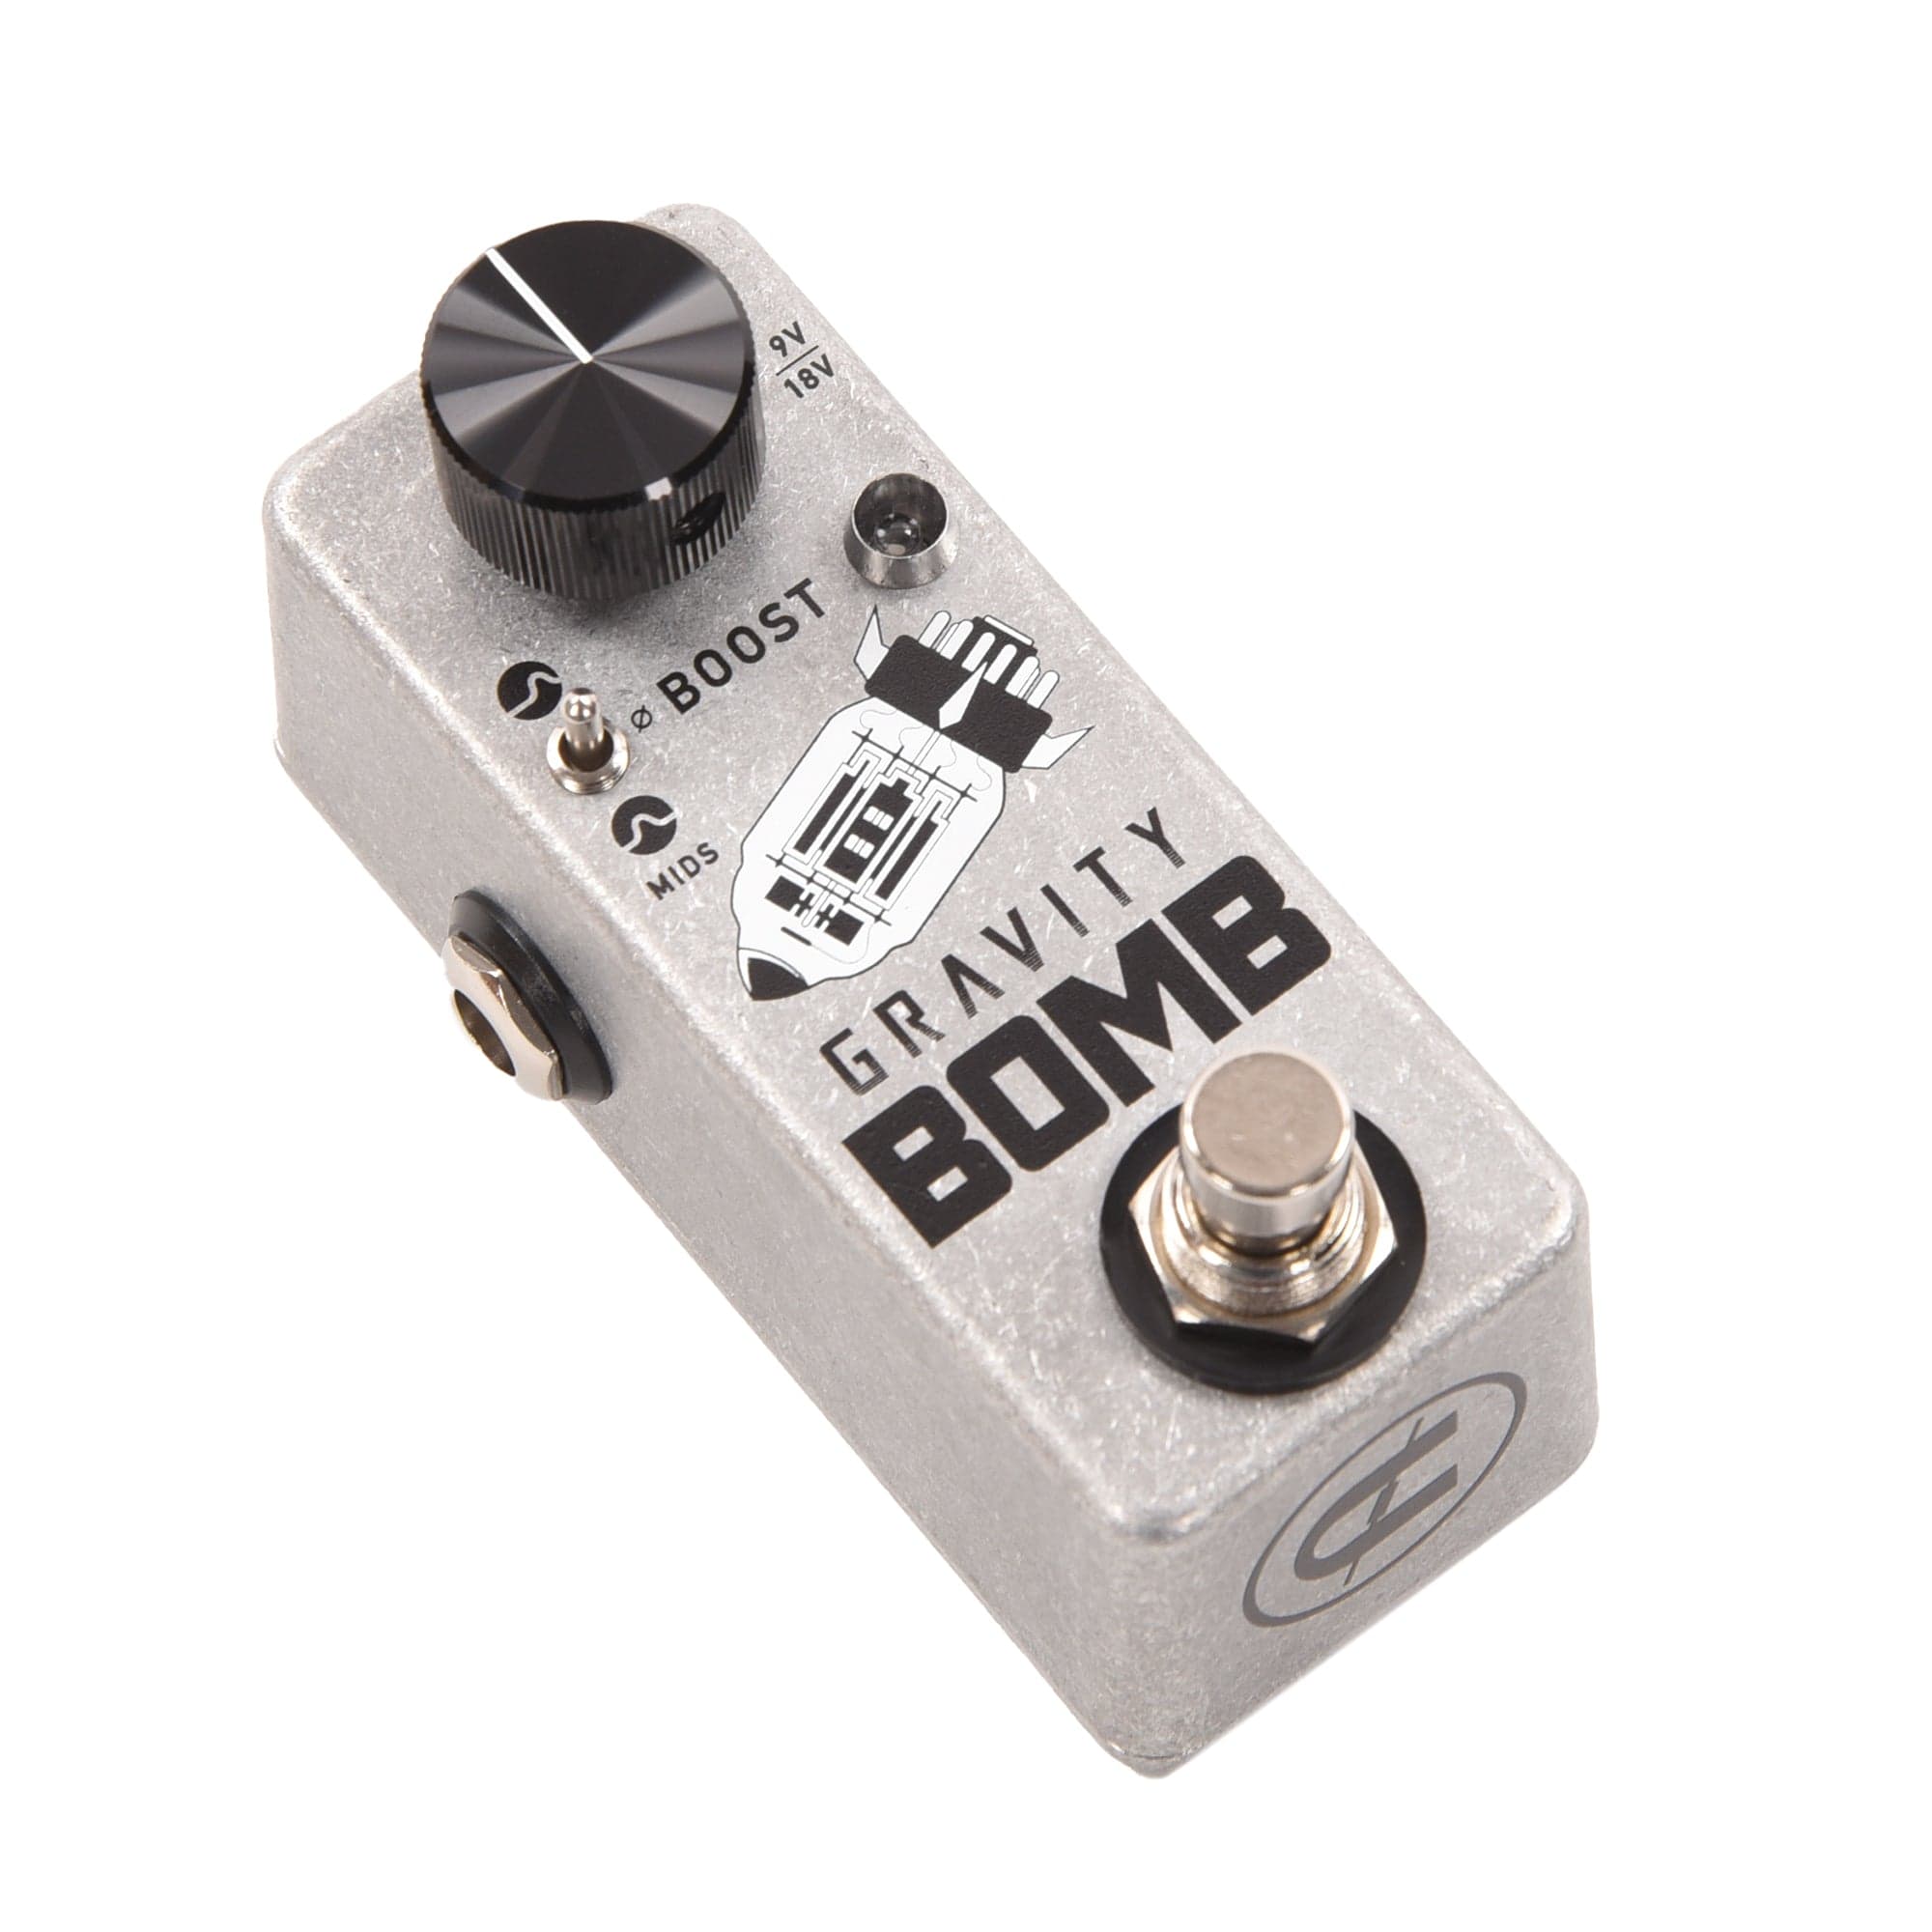 CopperSound Pedals Gravity Bomb V2 Op-Amp Boost Pedal Effects and Pedals / Overdrive and Boost